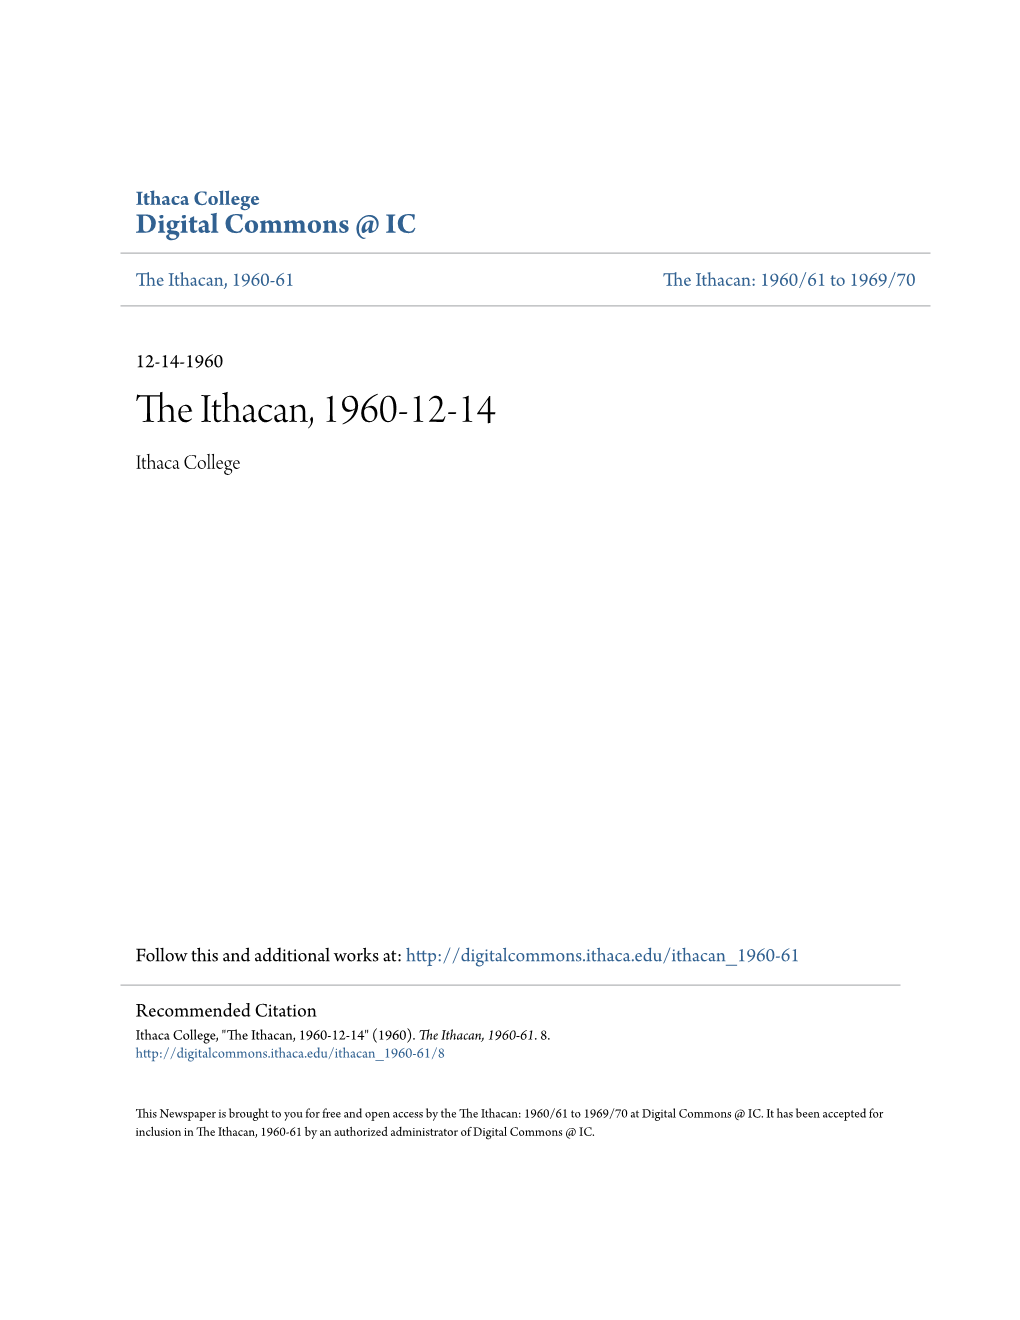 The Ithacan, 1960-12-14